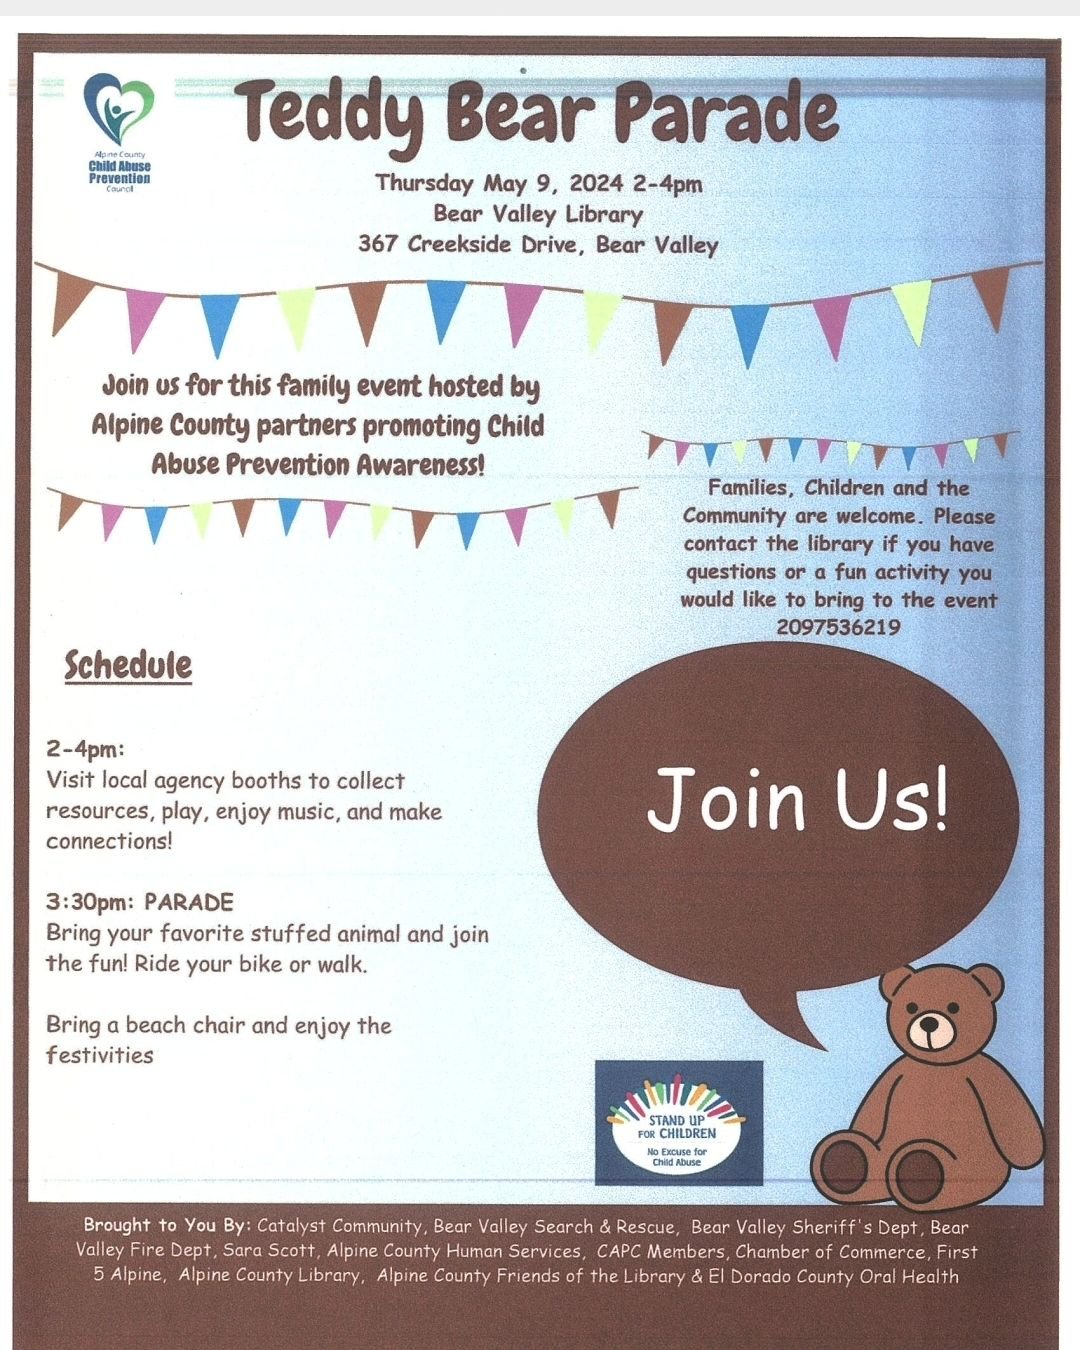 Come stop by the Teddy Bear Parade on May 9th!